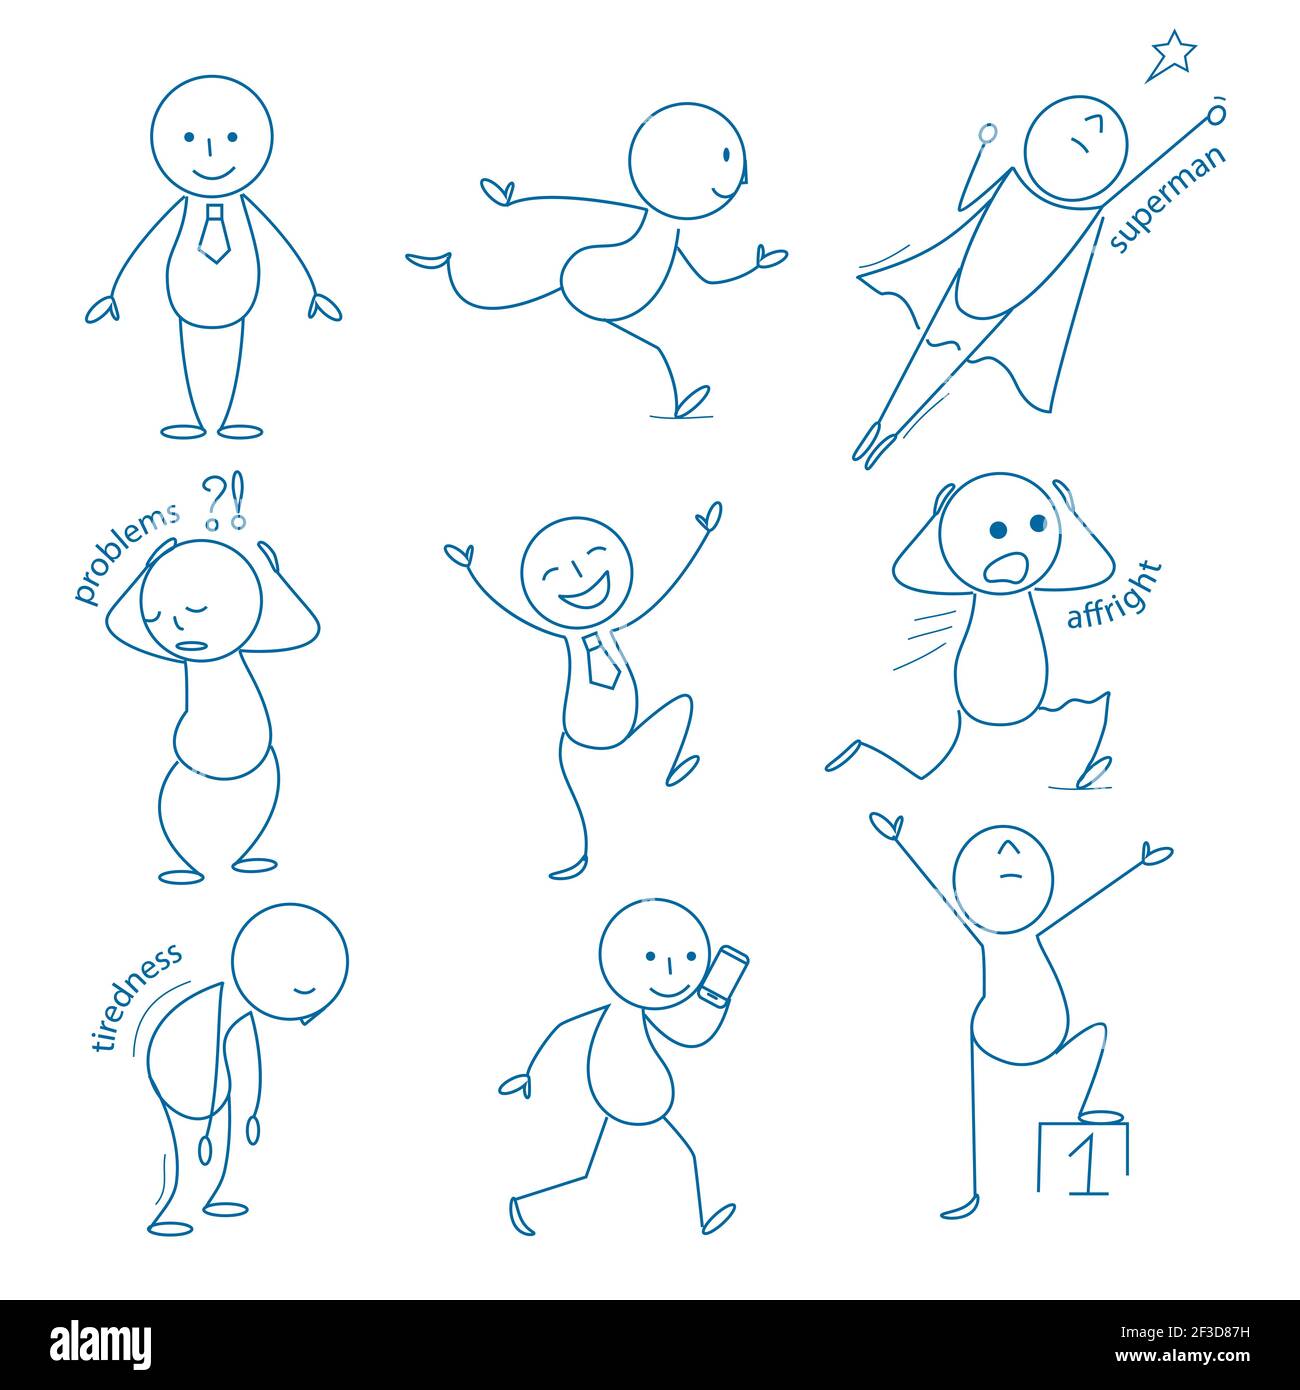 Business stickman. Hand drawn figures in different action poses running standing holding pointing sitting jumping vector business doodles Stock Vector